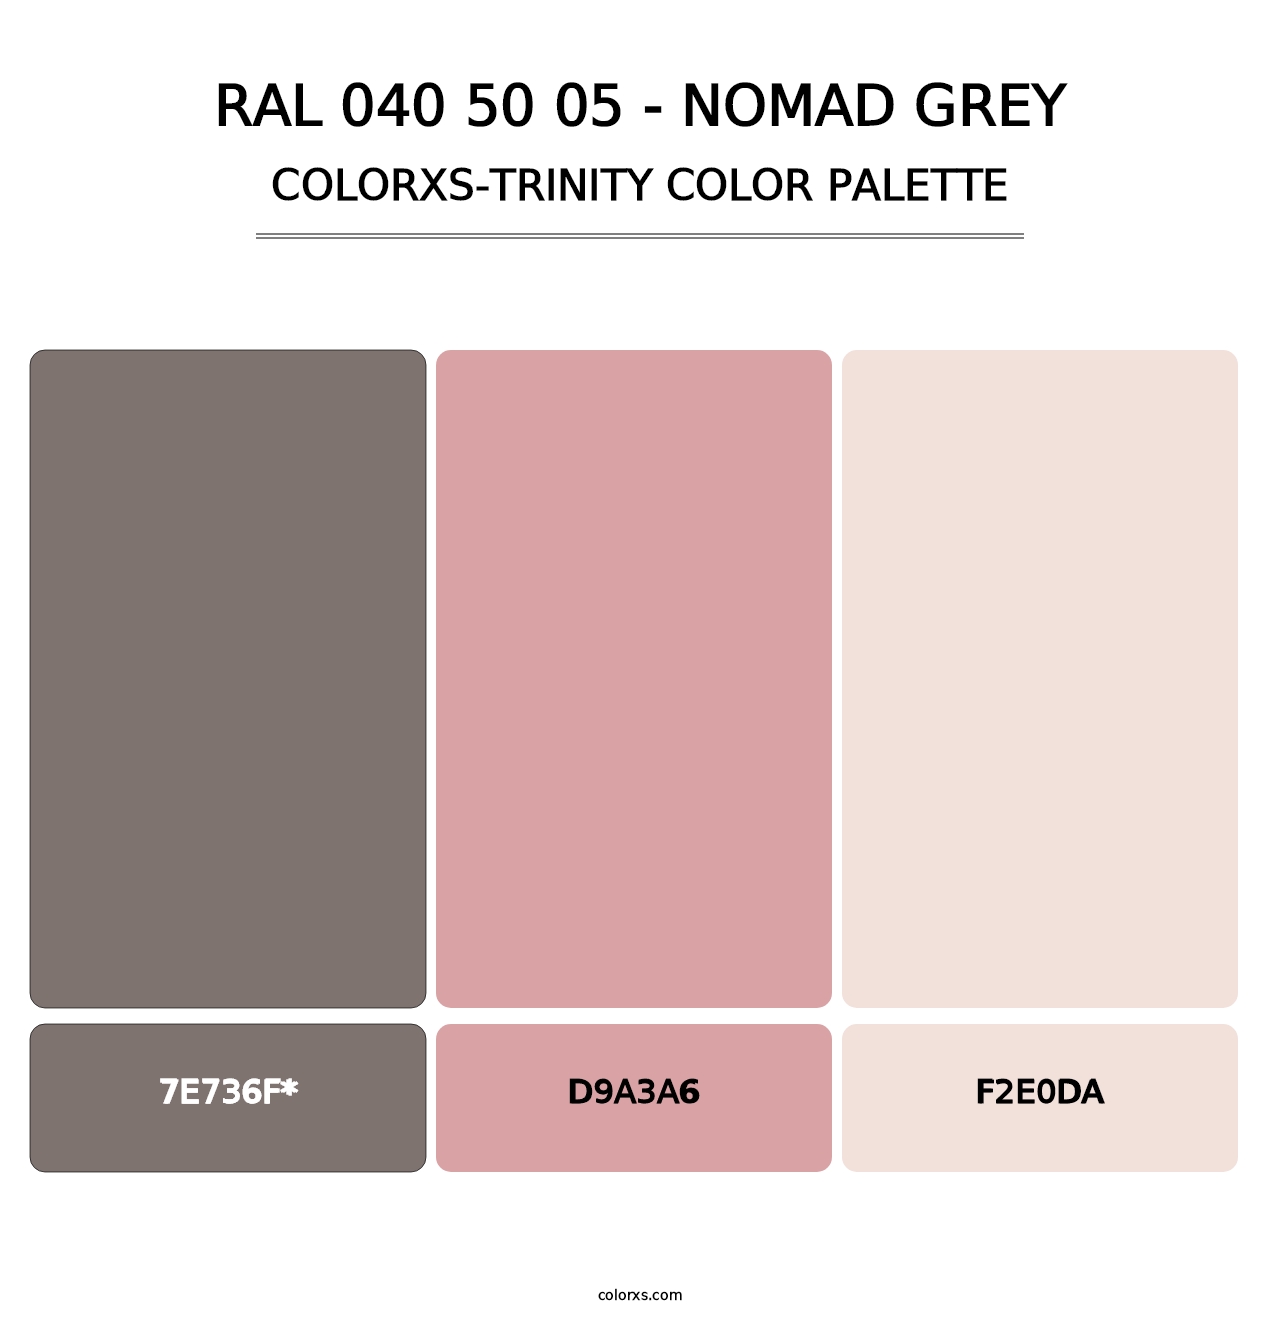 RAL 040 50 05 - Nomad Grey - Colorxs Trinity Palette